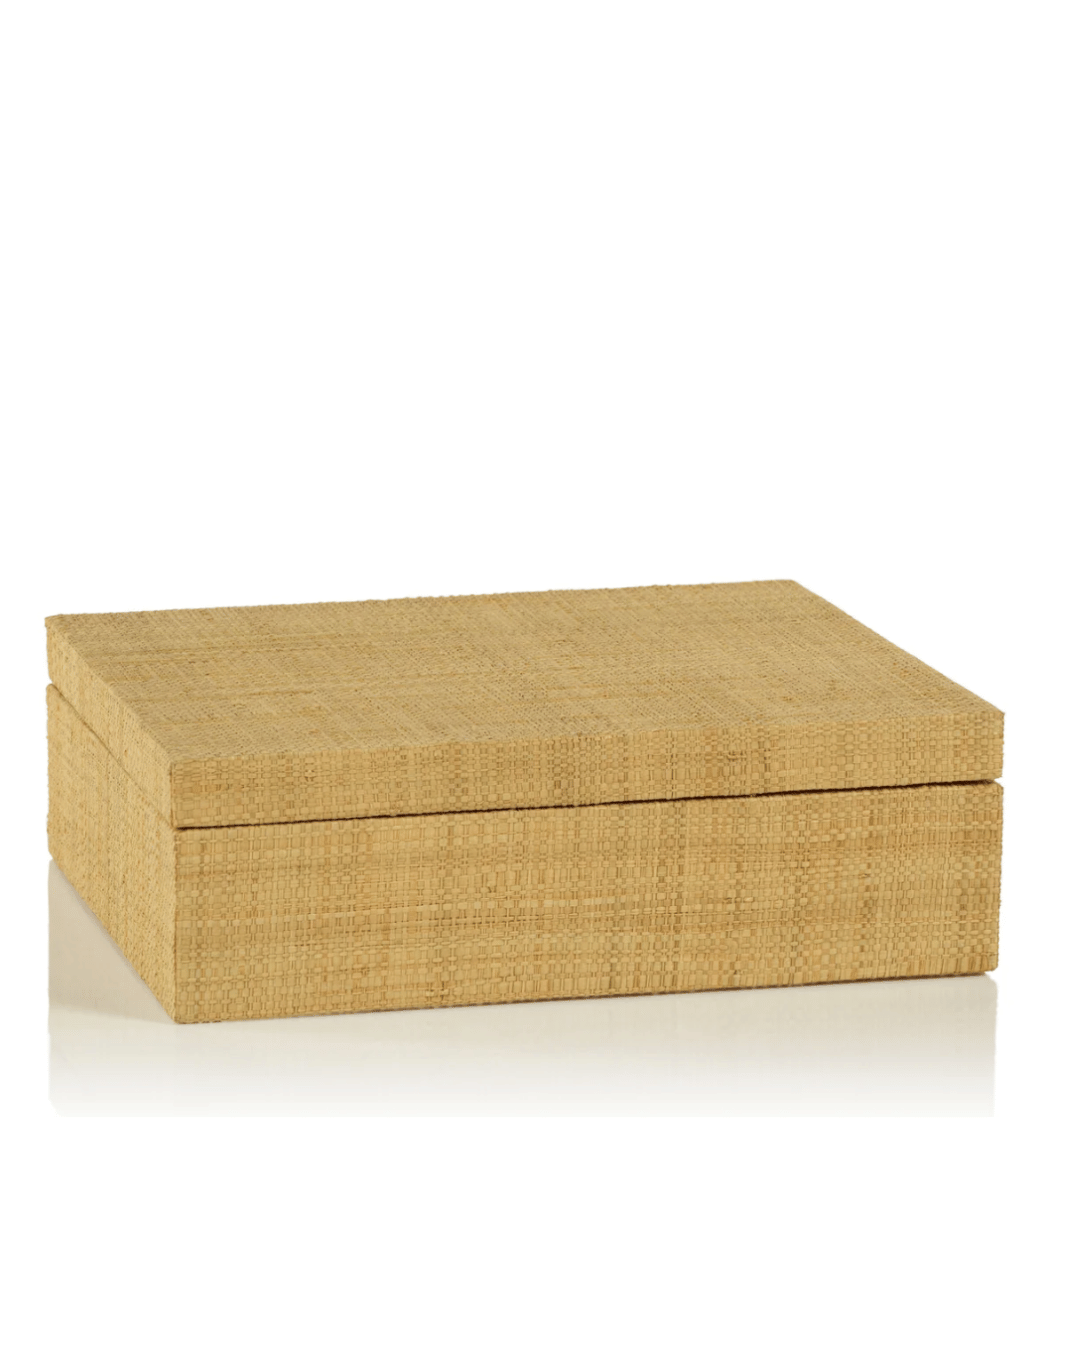 A Grasscloth Box Large made by Zodax, showcasing a subtle texture and a light beige color typical of Scottsdale, Arizona bungalows, set against a white background.